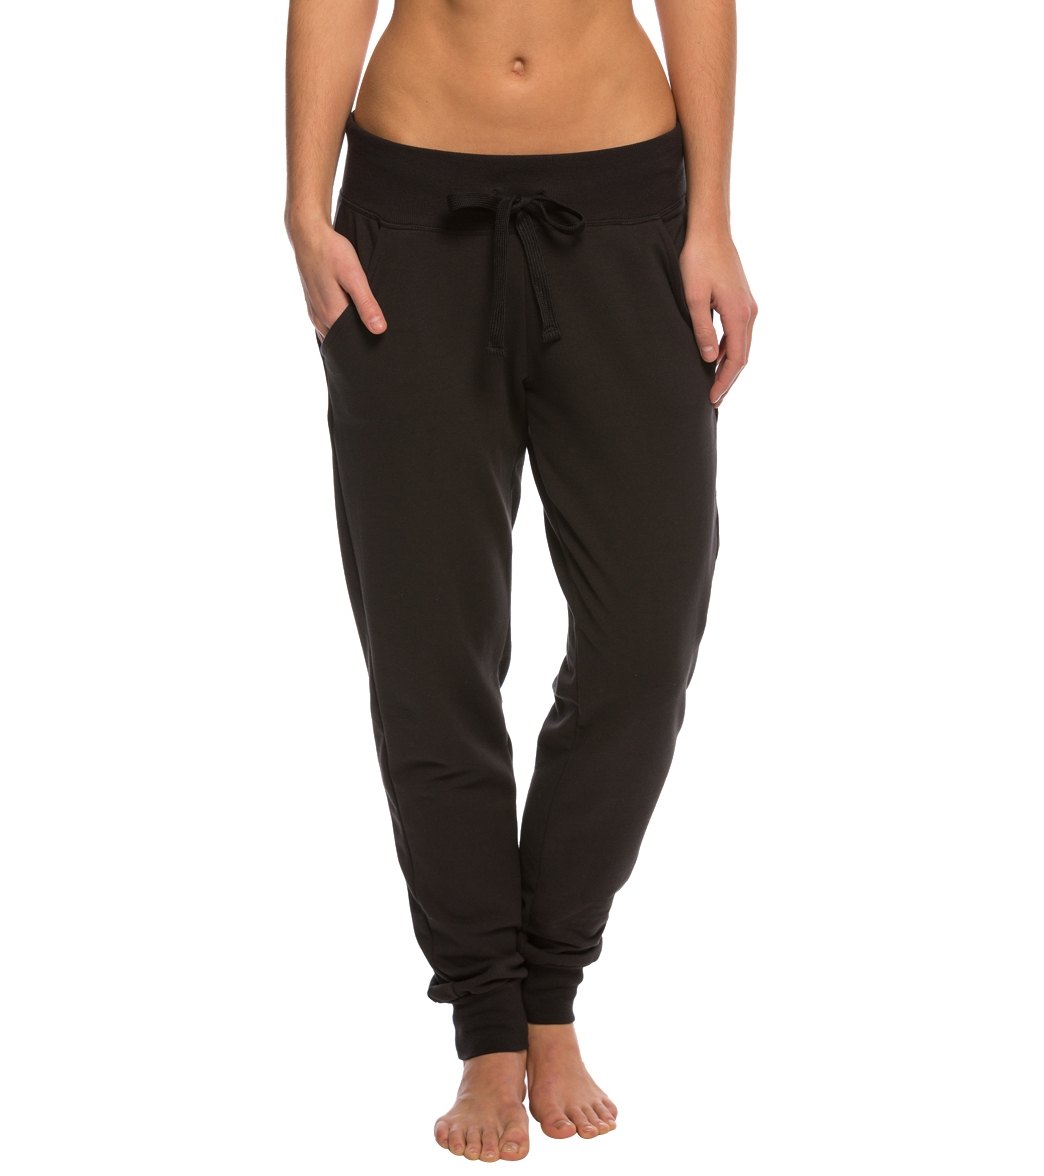 Just In: Marika & Balance Collection - Everyday Yoga